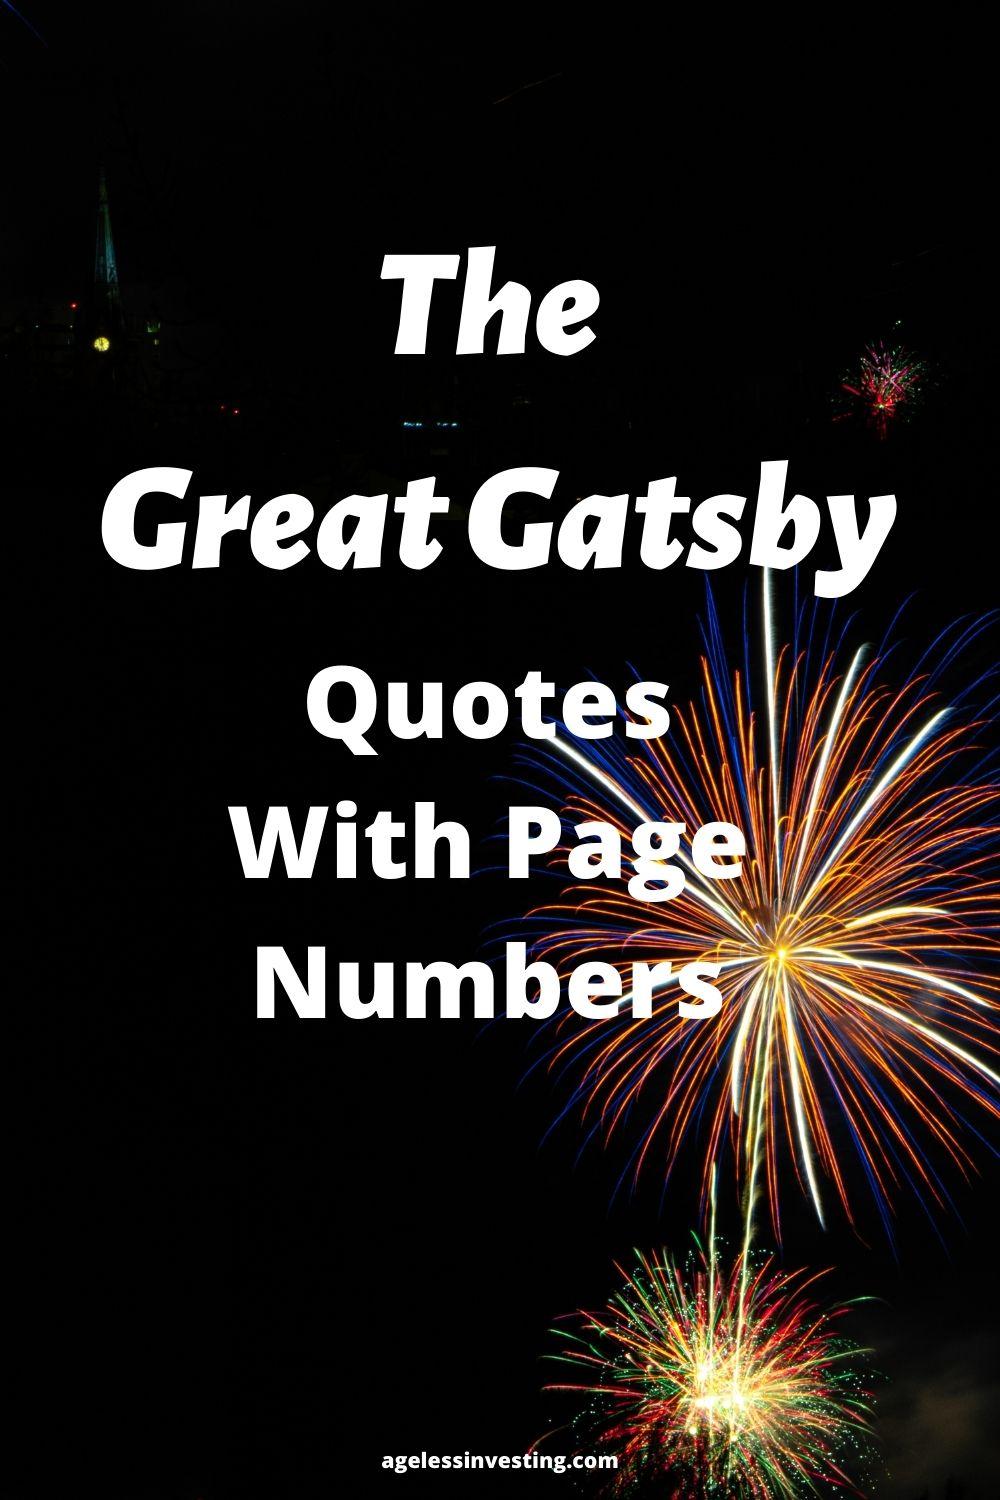 The Great Gatsby Quotes With Page Numbers 